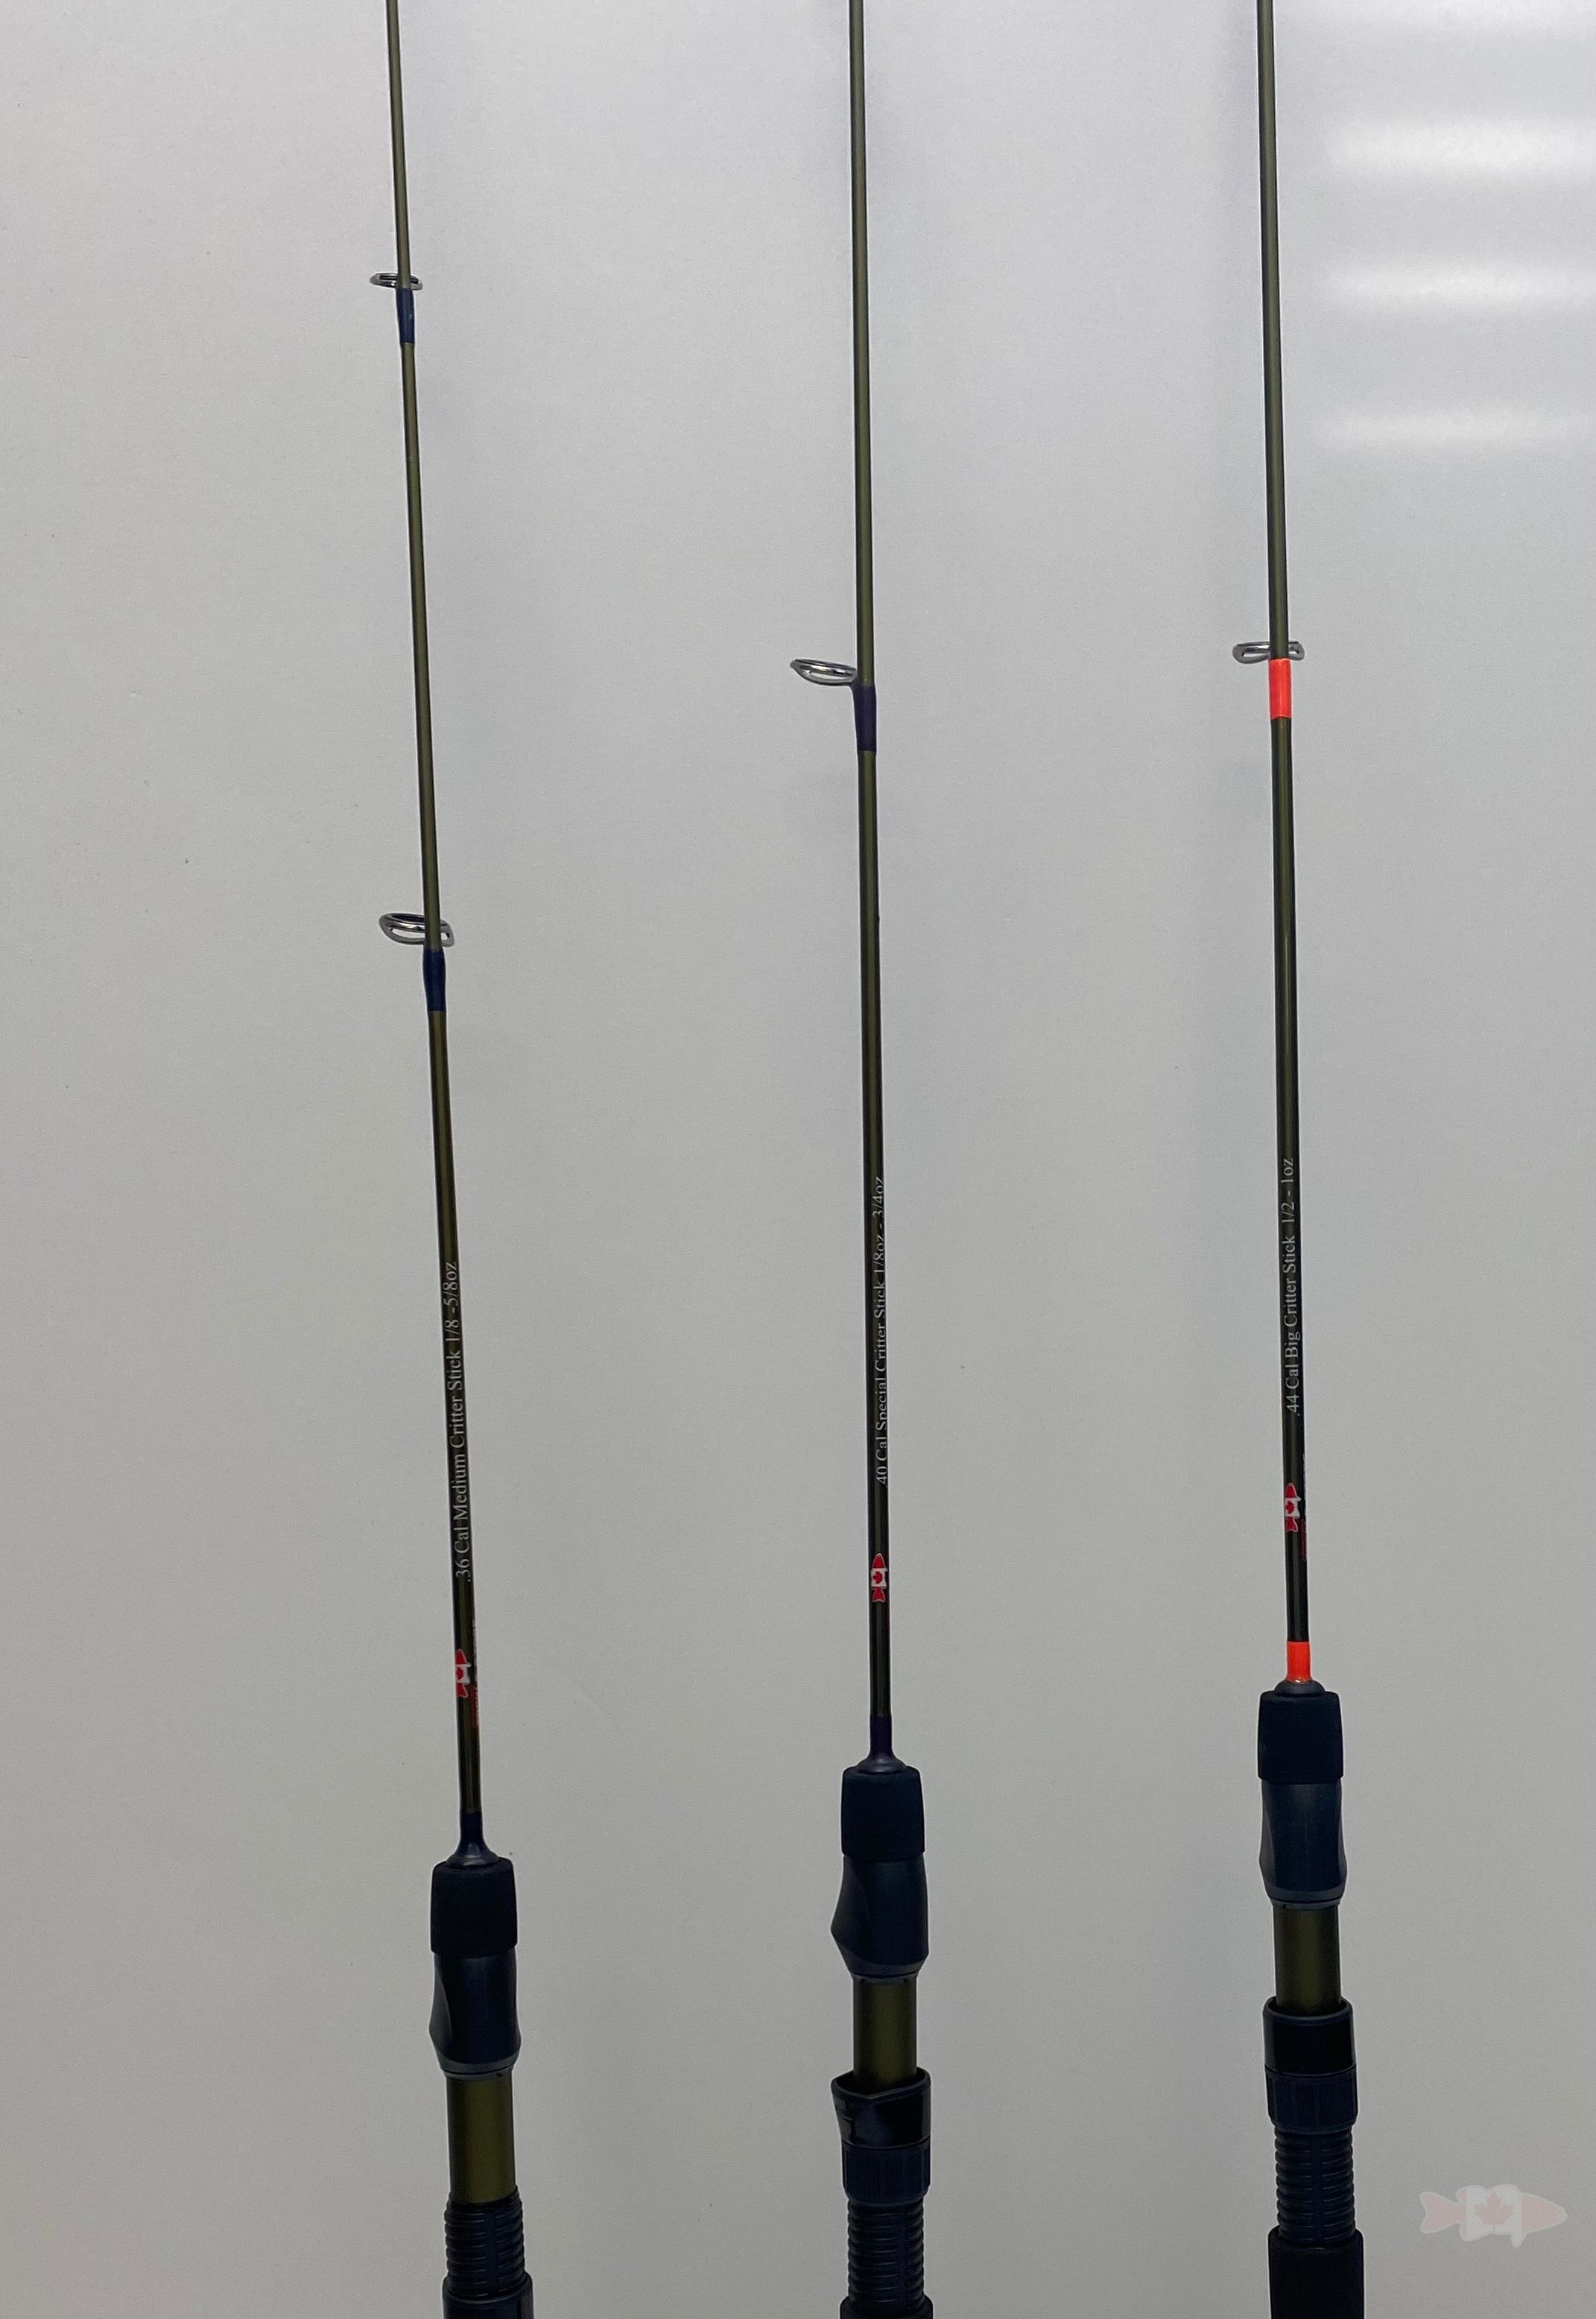 13 FISHING - Infrared - Lake Trout - Ice Fishing Rods 40 MH (Medium Heavy)